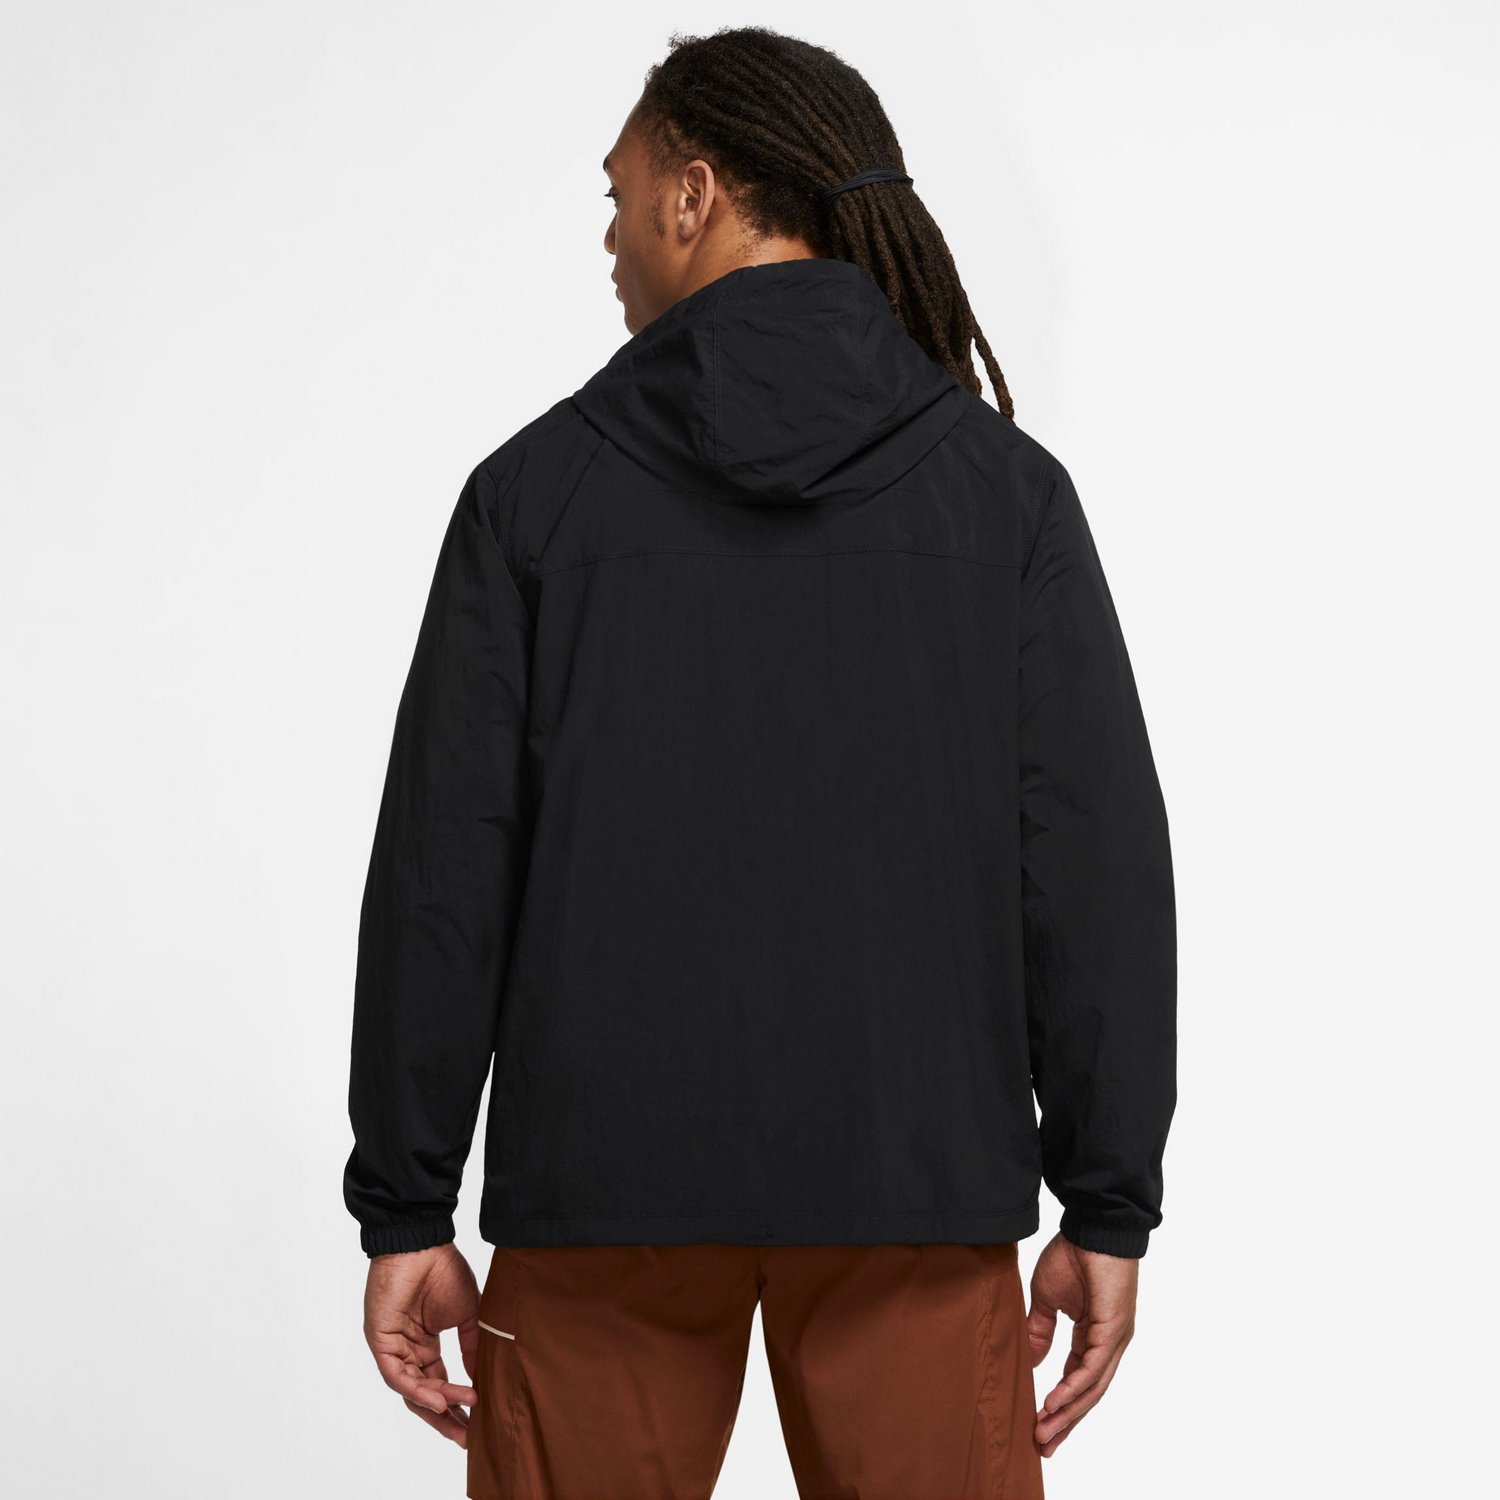 Nike Men's Club Full-Zip Woven Jacket | Free Shipping at Academy